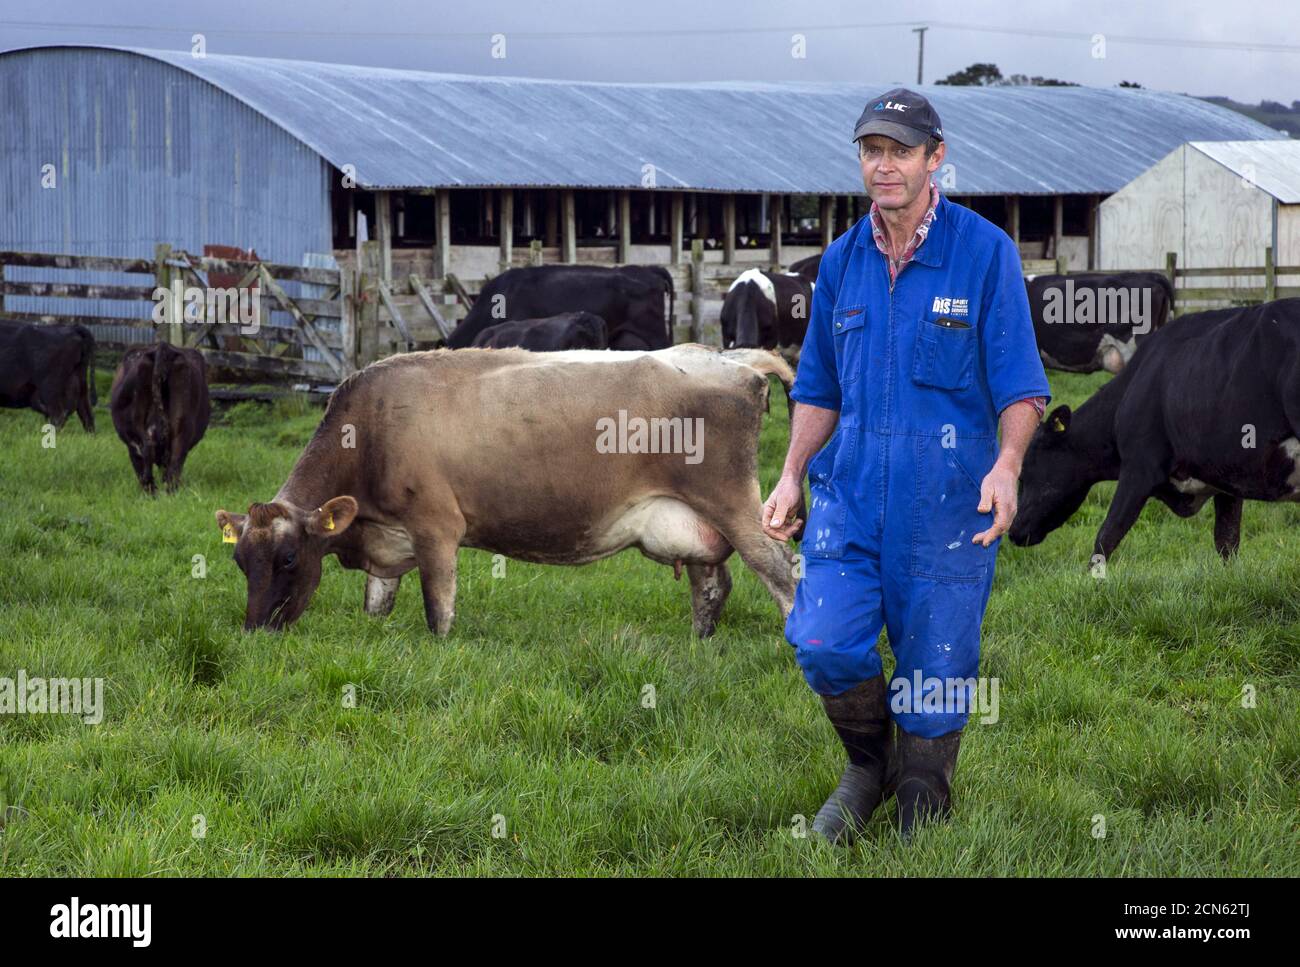 Dairy farmer Keith Trotter stands in a field near milking sheds amongst his herd of cows on his farm in the town of Matakana, located north of Auckland, New Zealand, September 24, 2015. New Zealand dairy processor Fonterra increased its milk price payout forecast and reported a 183 percent rise in full-year profit on Thursday amid a modest recovery from this year's plummet in global dairy prices. The world's largest dairy exporter said net profit after tax was NZ$506 million ($317.36 million) in the year to July 31, compared with NZ$179 million a year ago.  REUTERS/Nigel Marple Stock Photo